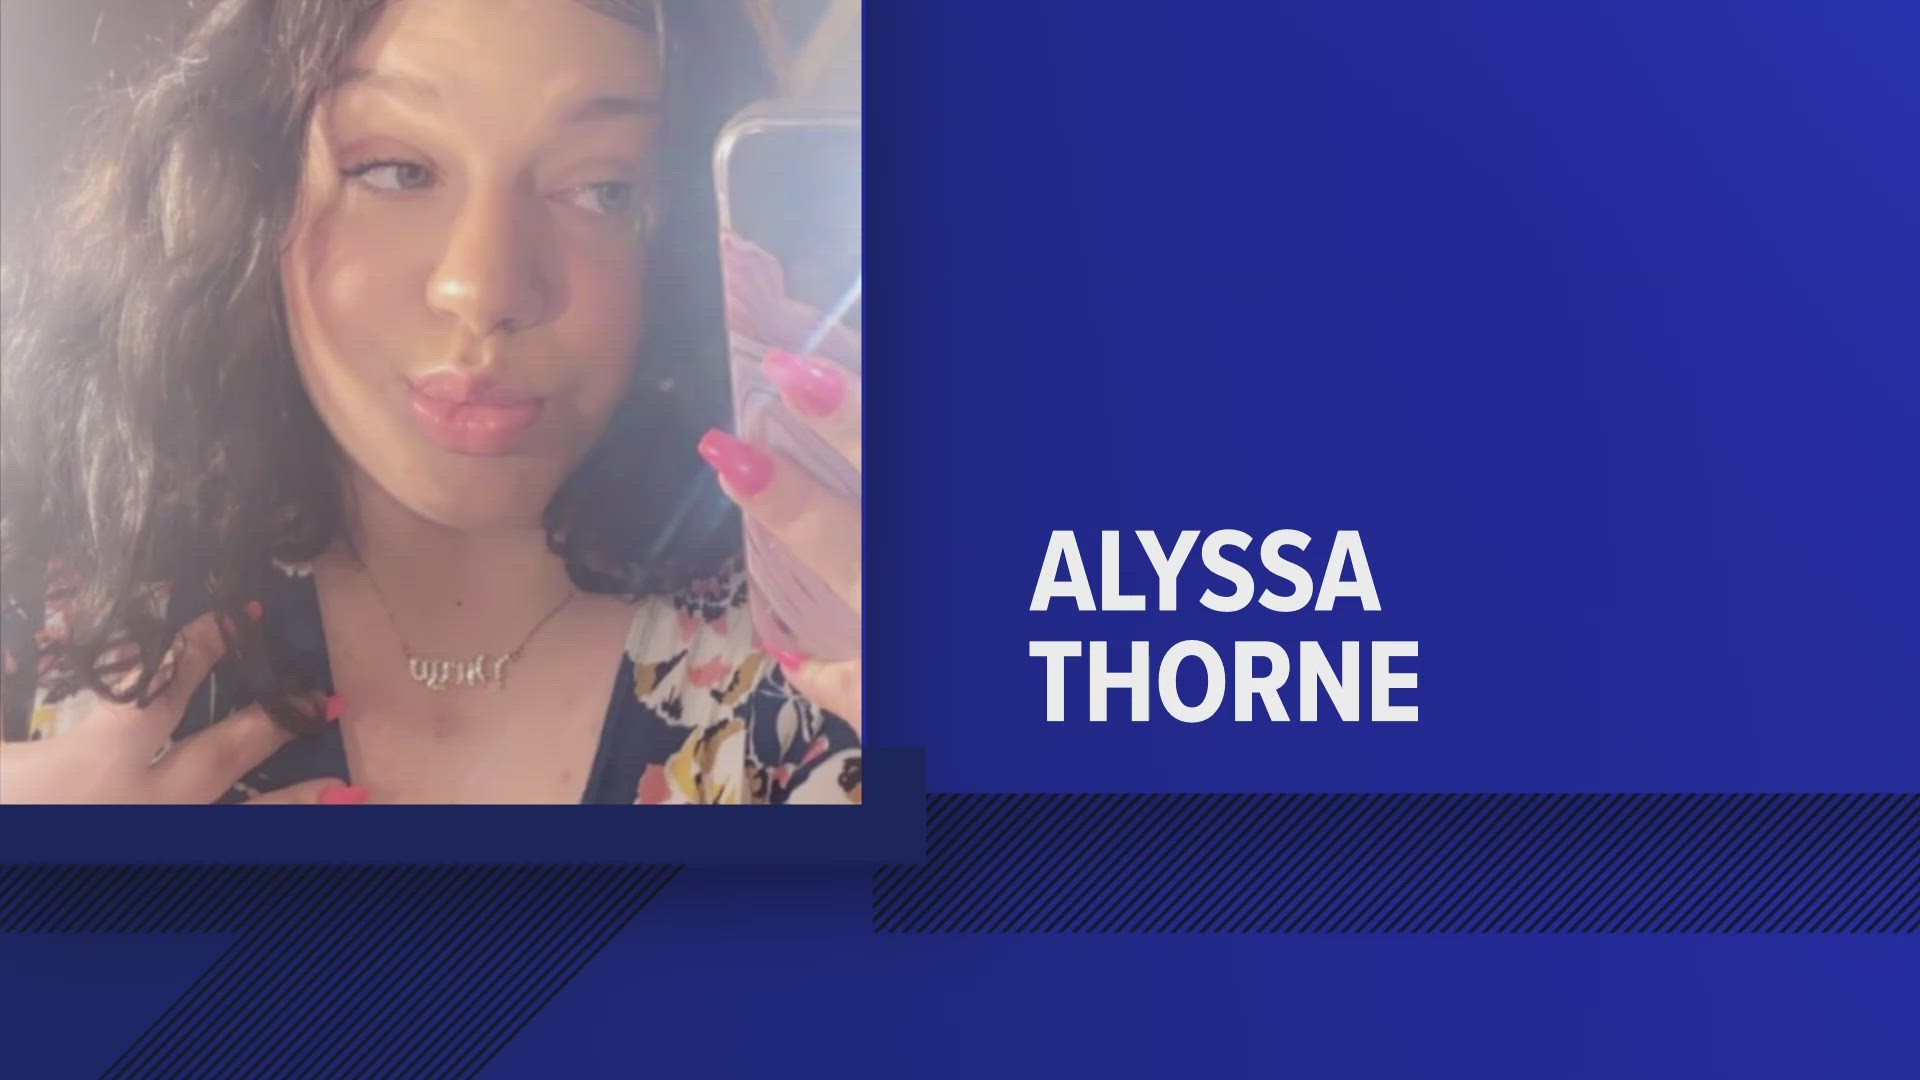 Alyssa Thorne was 16 years old, and one of two teens who died Tuesday in an apparent drug overdose before a high school graduation.